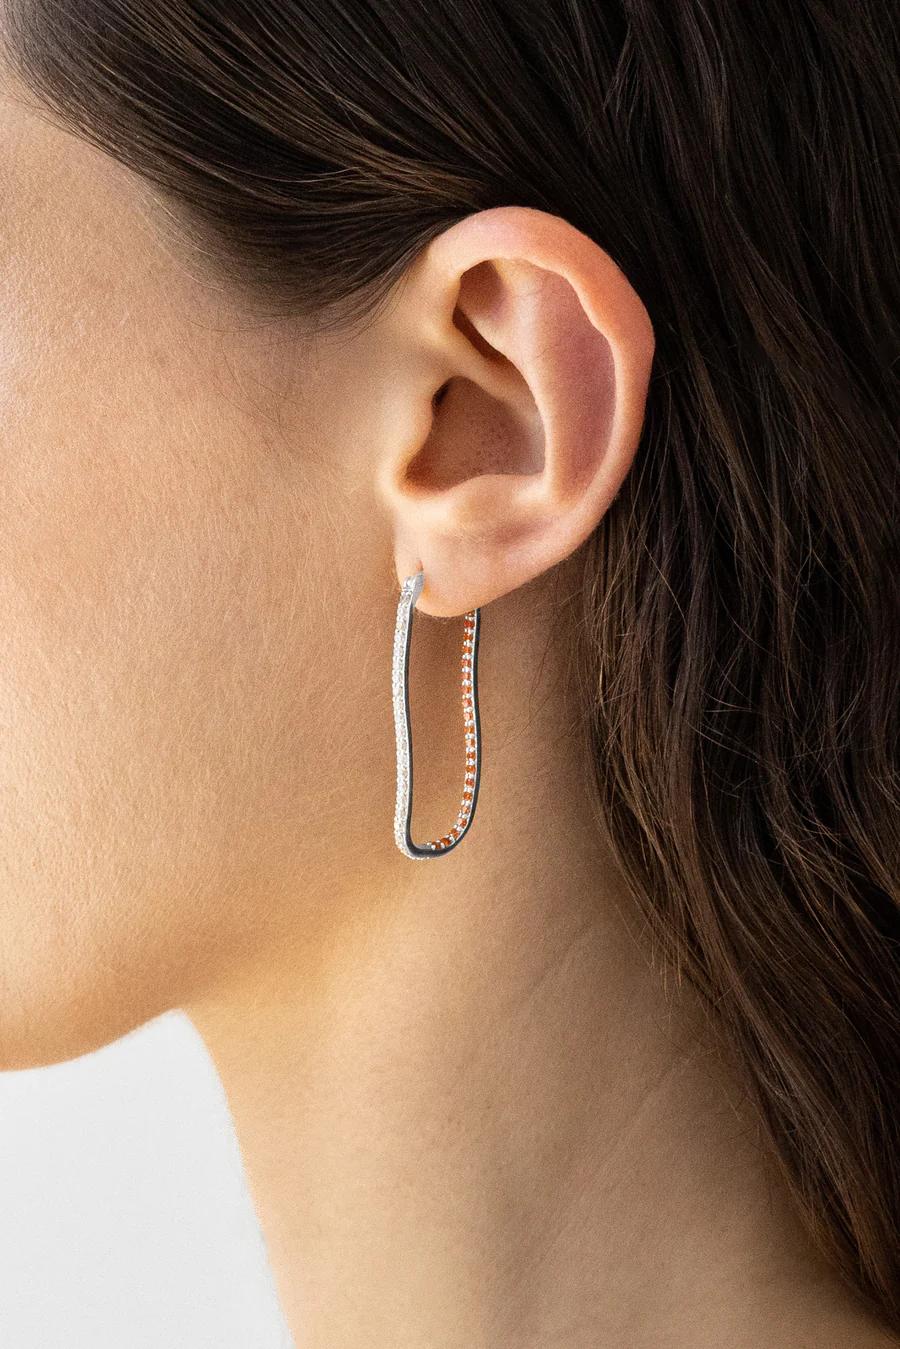 Product Image for Fiasco Paved Hoops, Tangerine - Sterling Silver